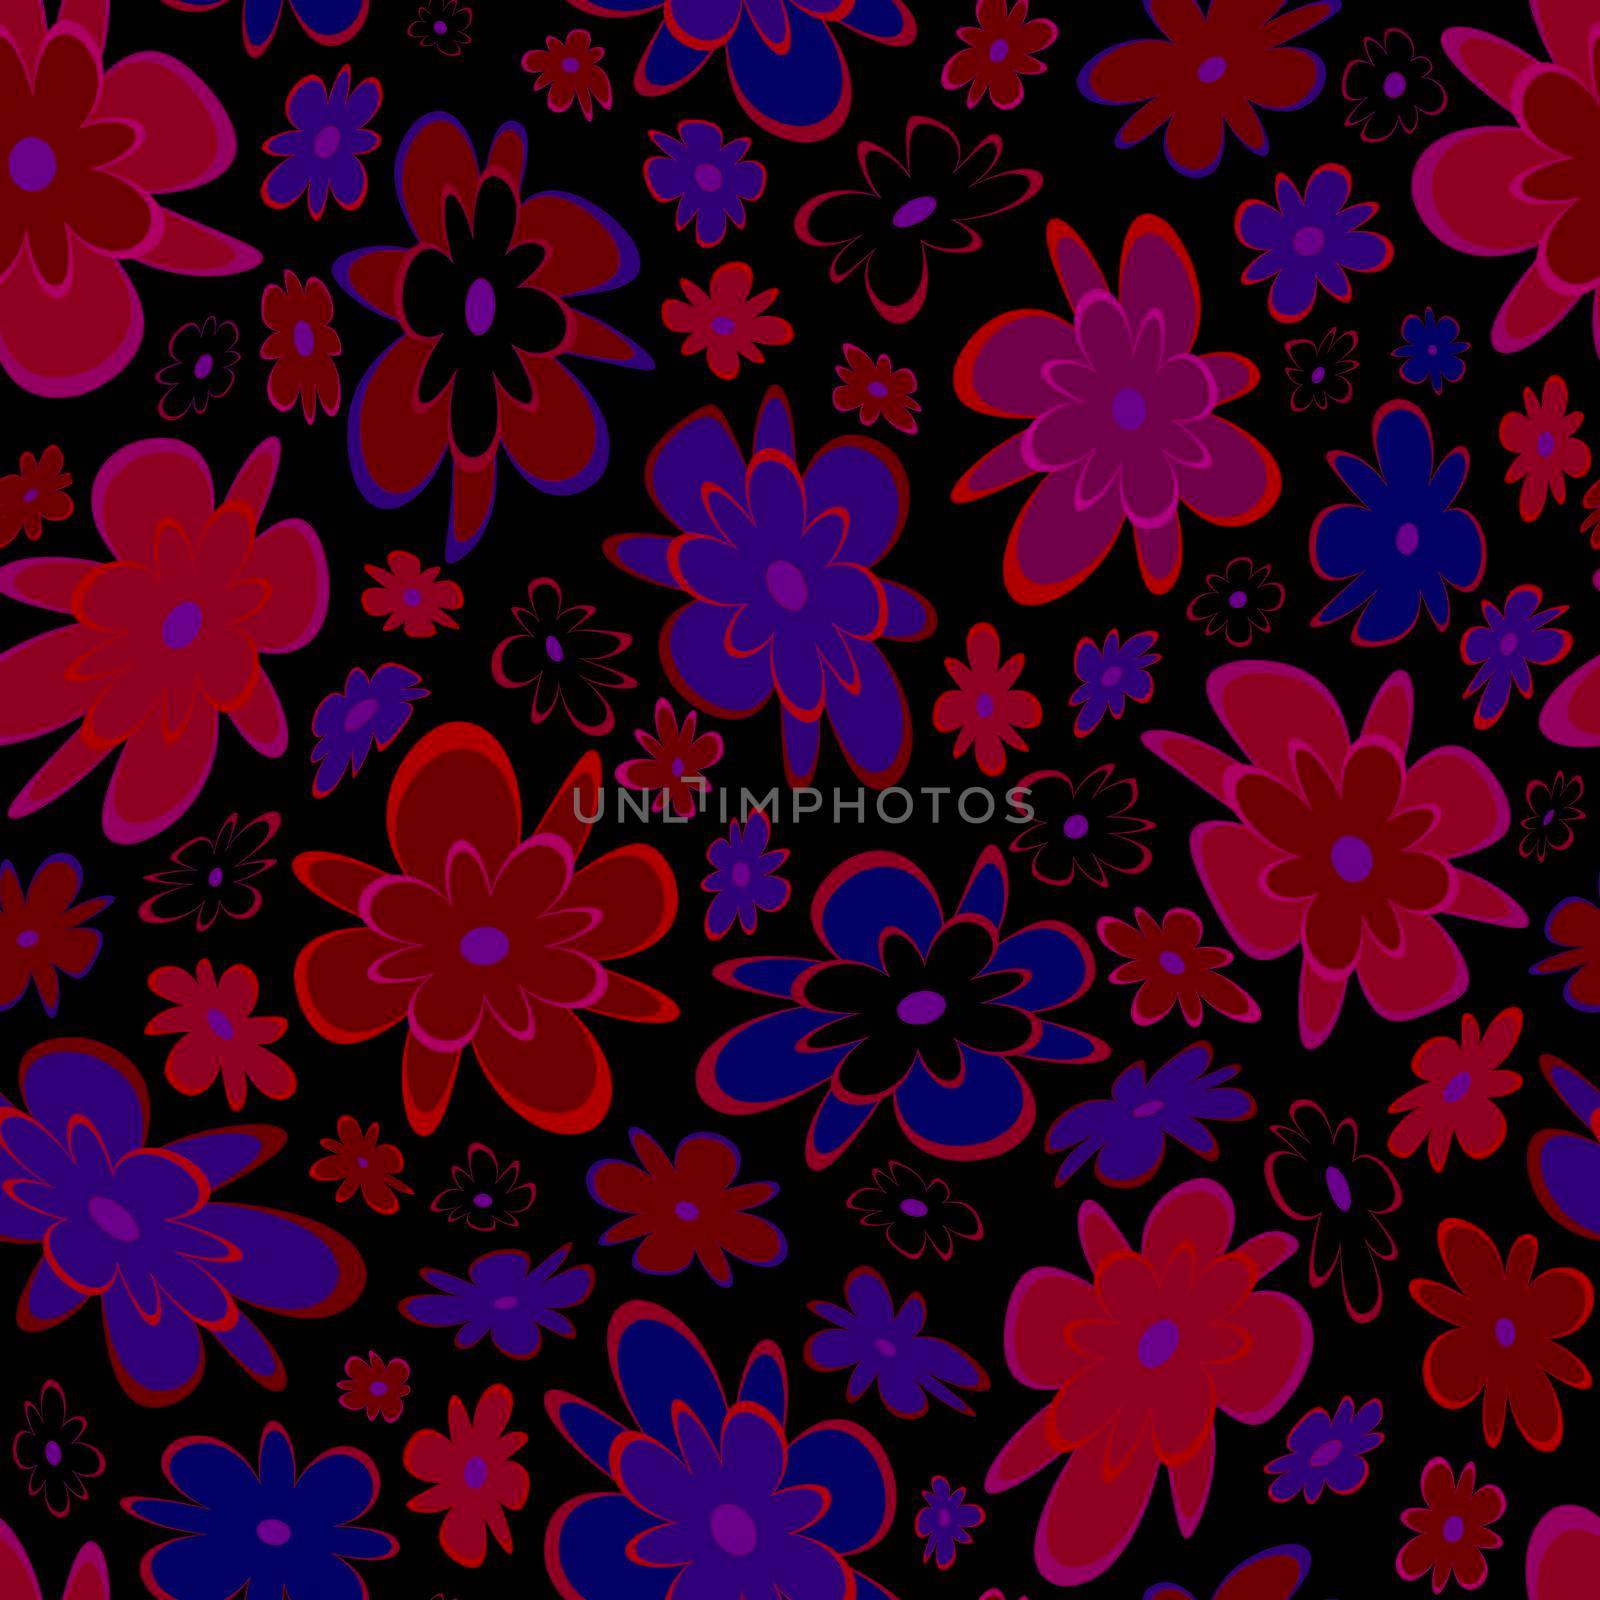 Trendy fabric pattern with miniature flowers.Summer print.Fashion design.Motifs scattered random.Elegant template for fashion prints.Good for fashion,textile,fabric,gift wrapping paper.Burgundy black.